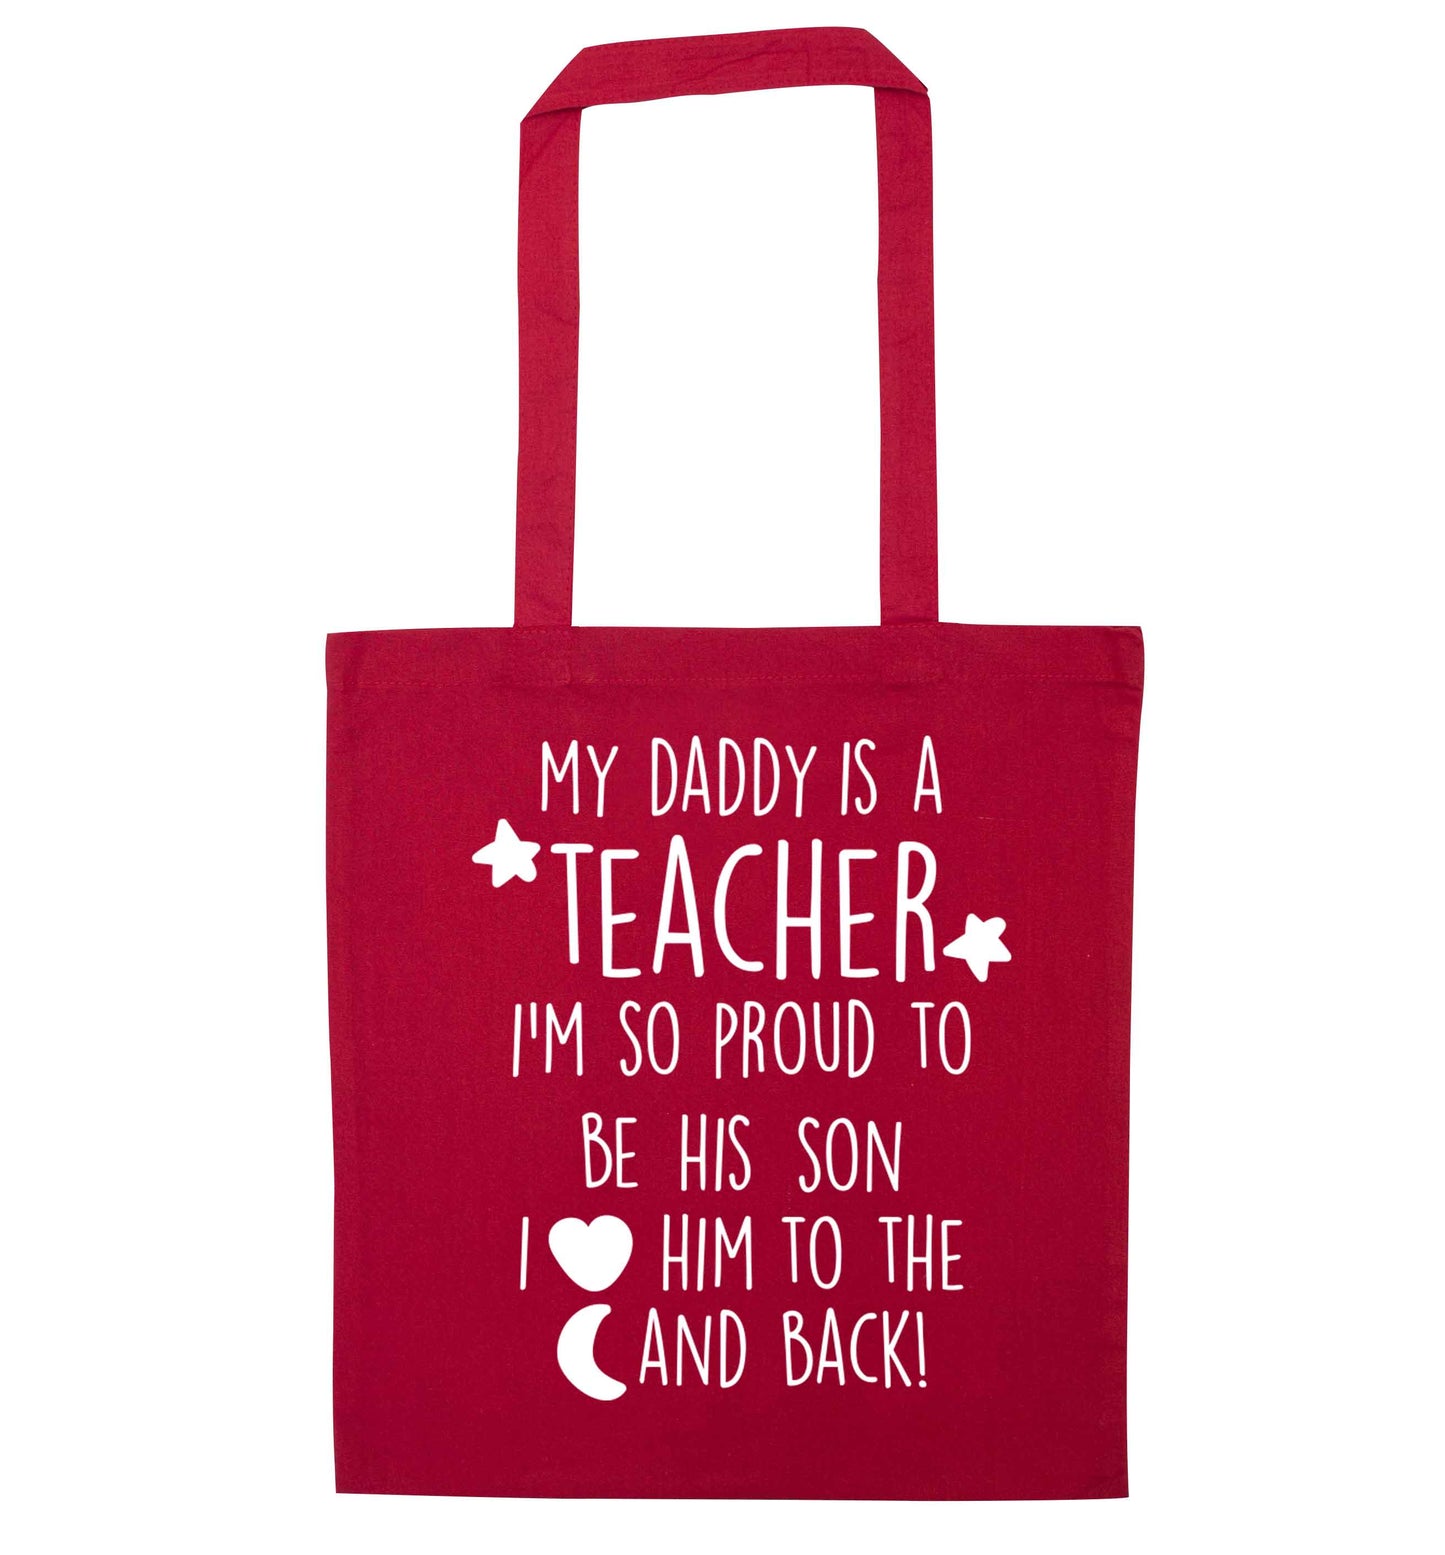 My daddy is a teacher I'm so proud to be his son I love her to the moon and back red tote bag